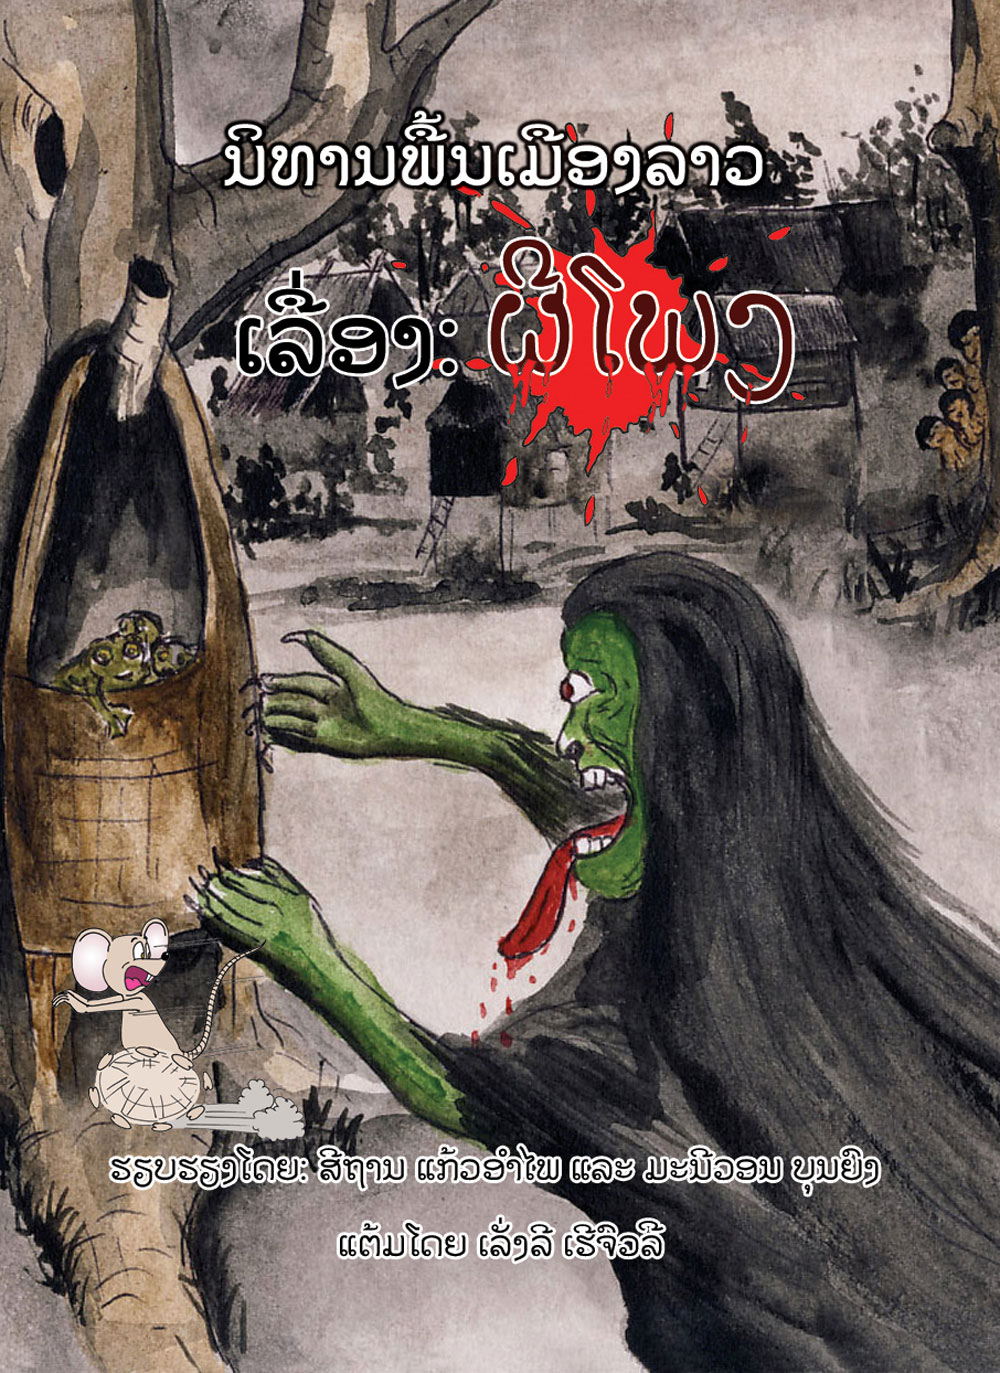 Phiiphong large book cover, published in Lao language